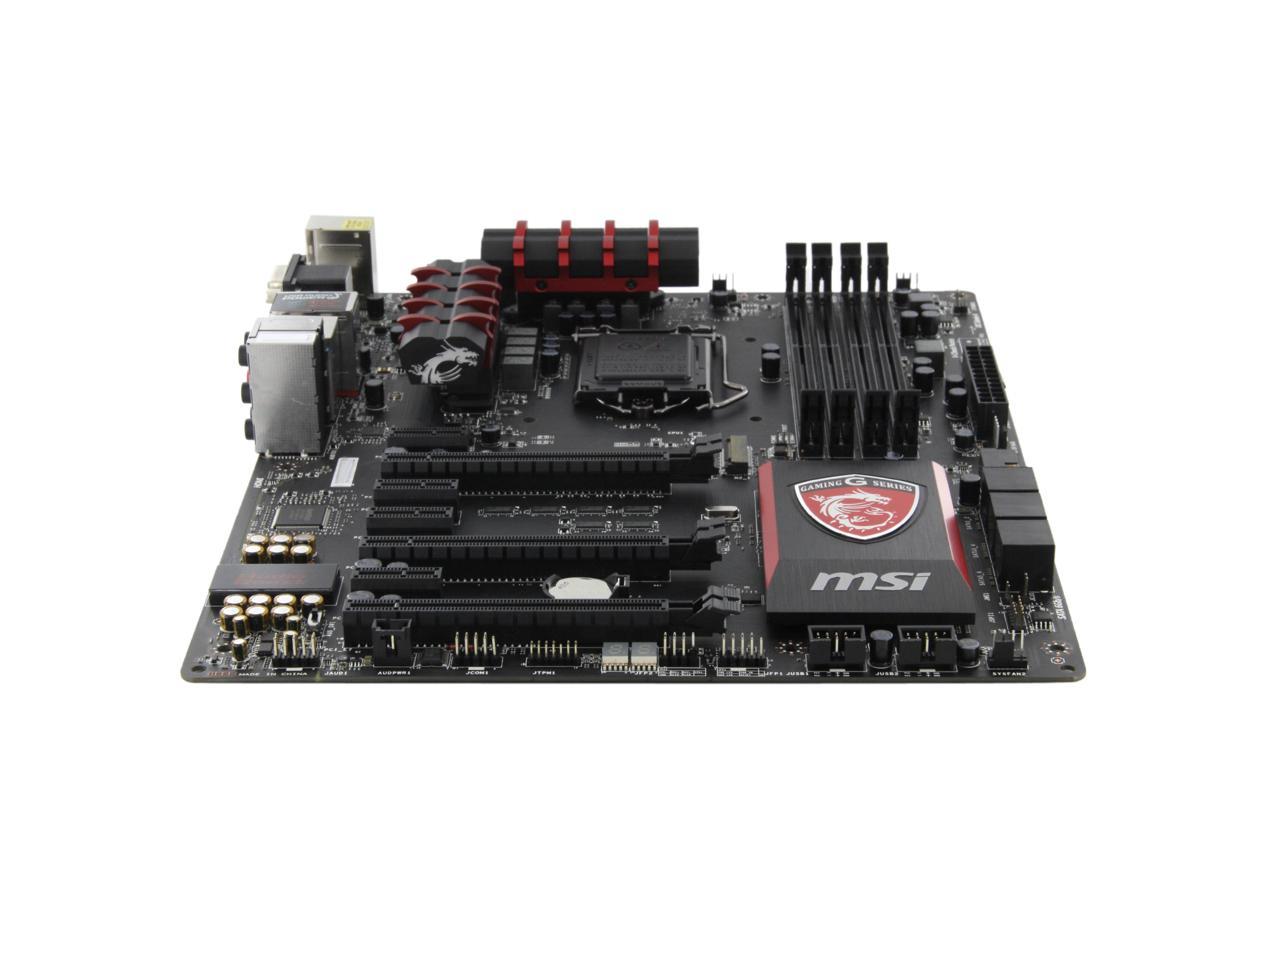 Msi z97 gaming 5. Ddr5 on motherboard. Системная плата MSI z97 Gaming 5 (MS-7917) микрофон. Z97a Gaming 6.